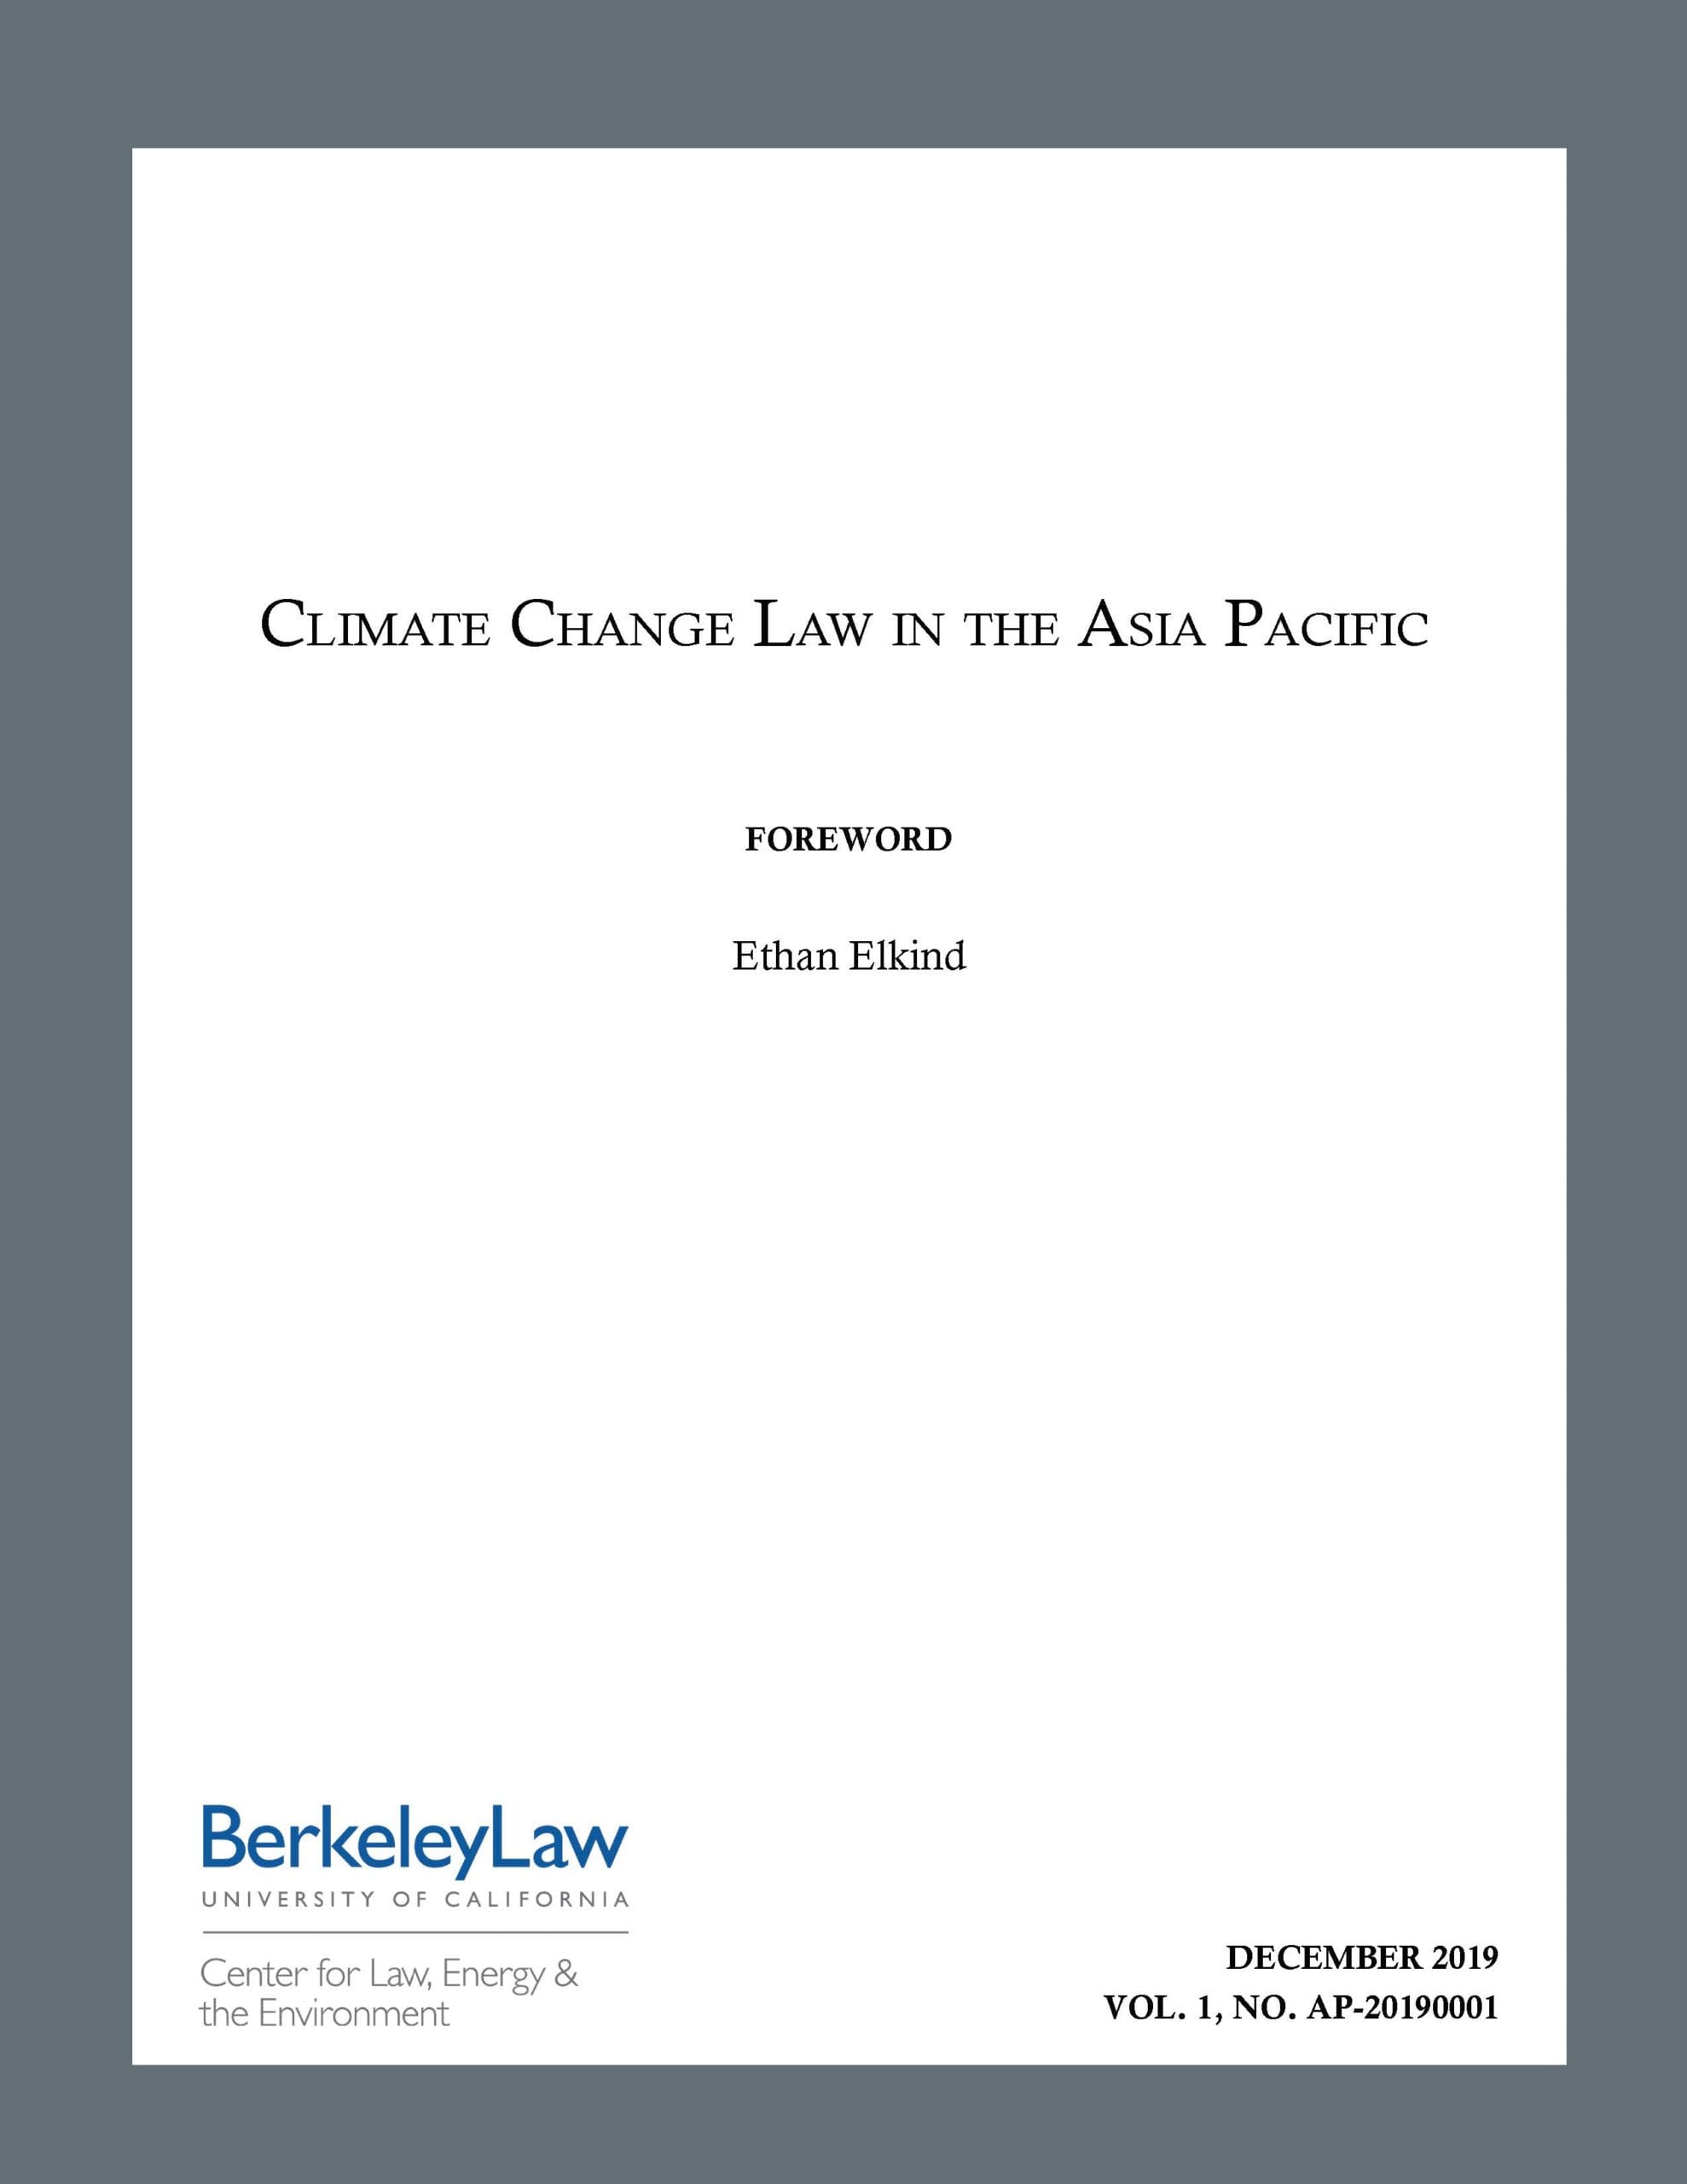 View Climate Change Law in the Asia Pacific